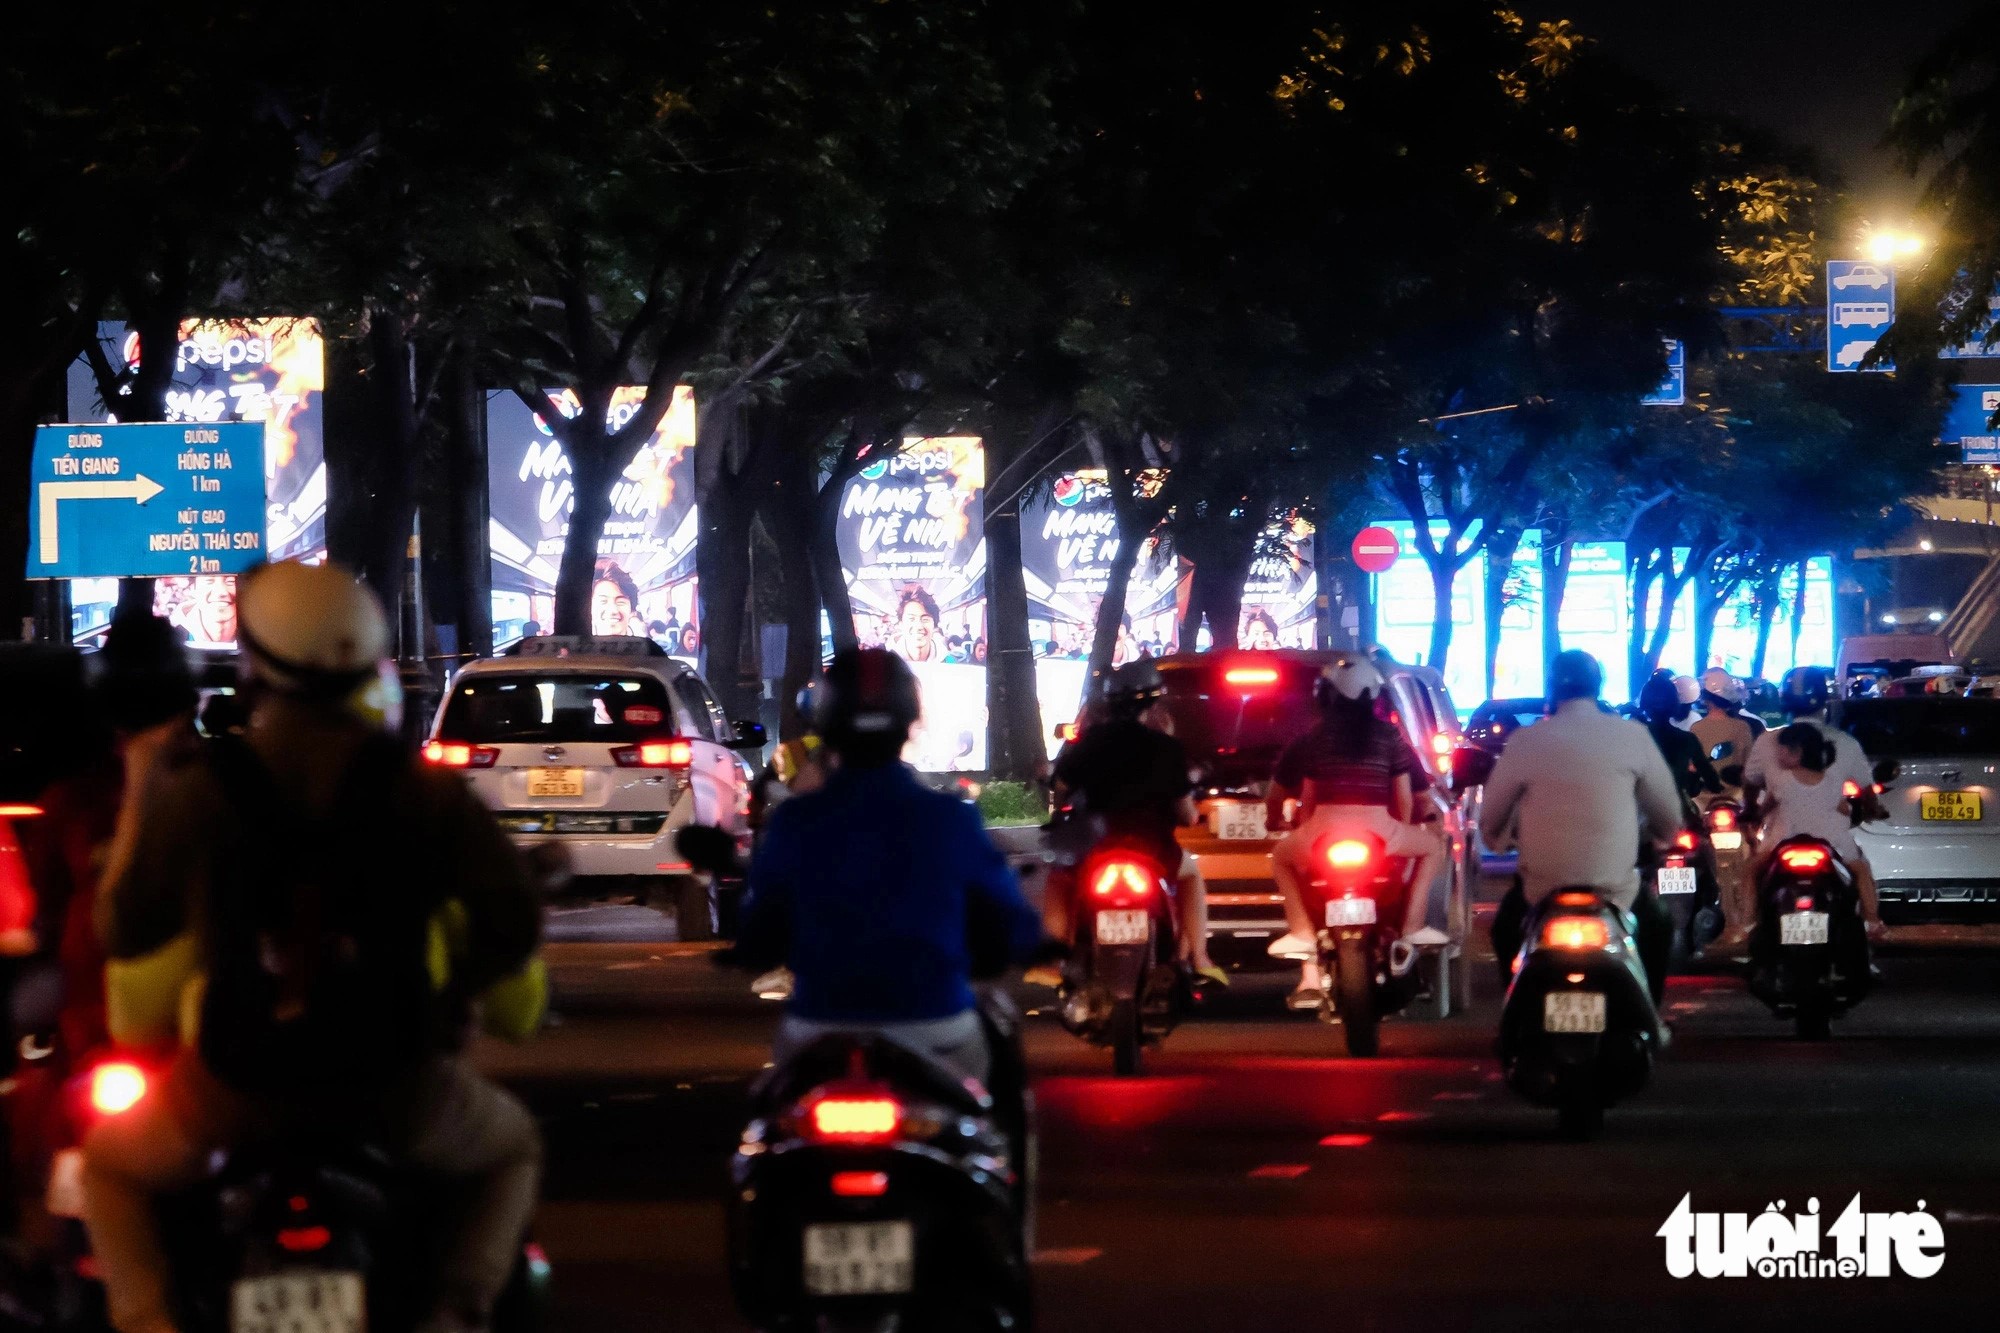 LED screens along Truong Son Street in Tan Binh District, Ho Chi Minh City.